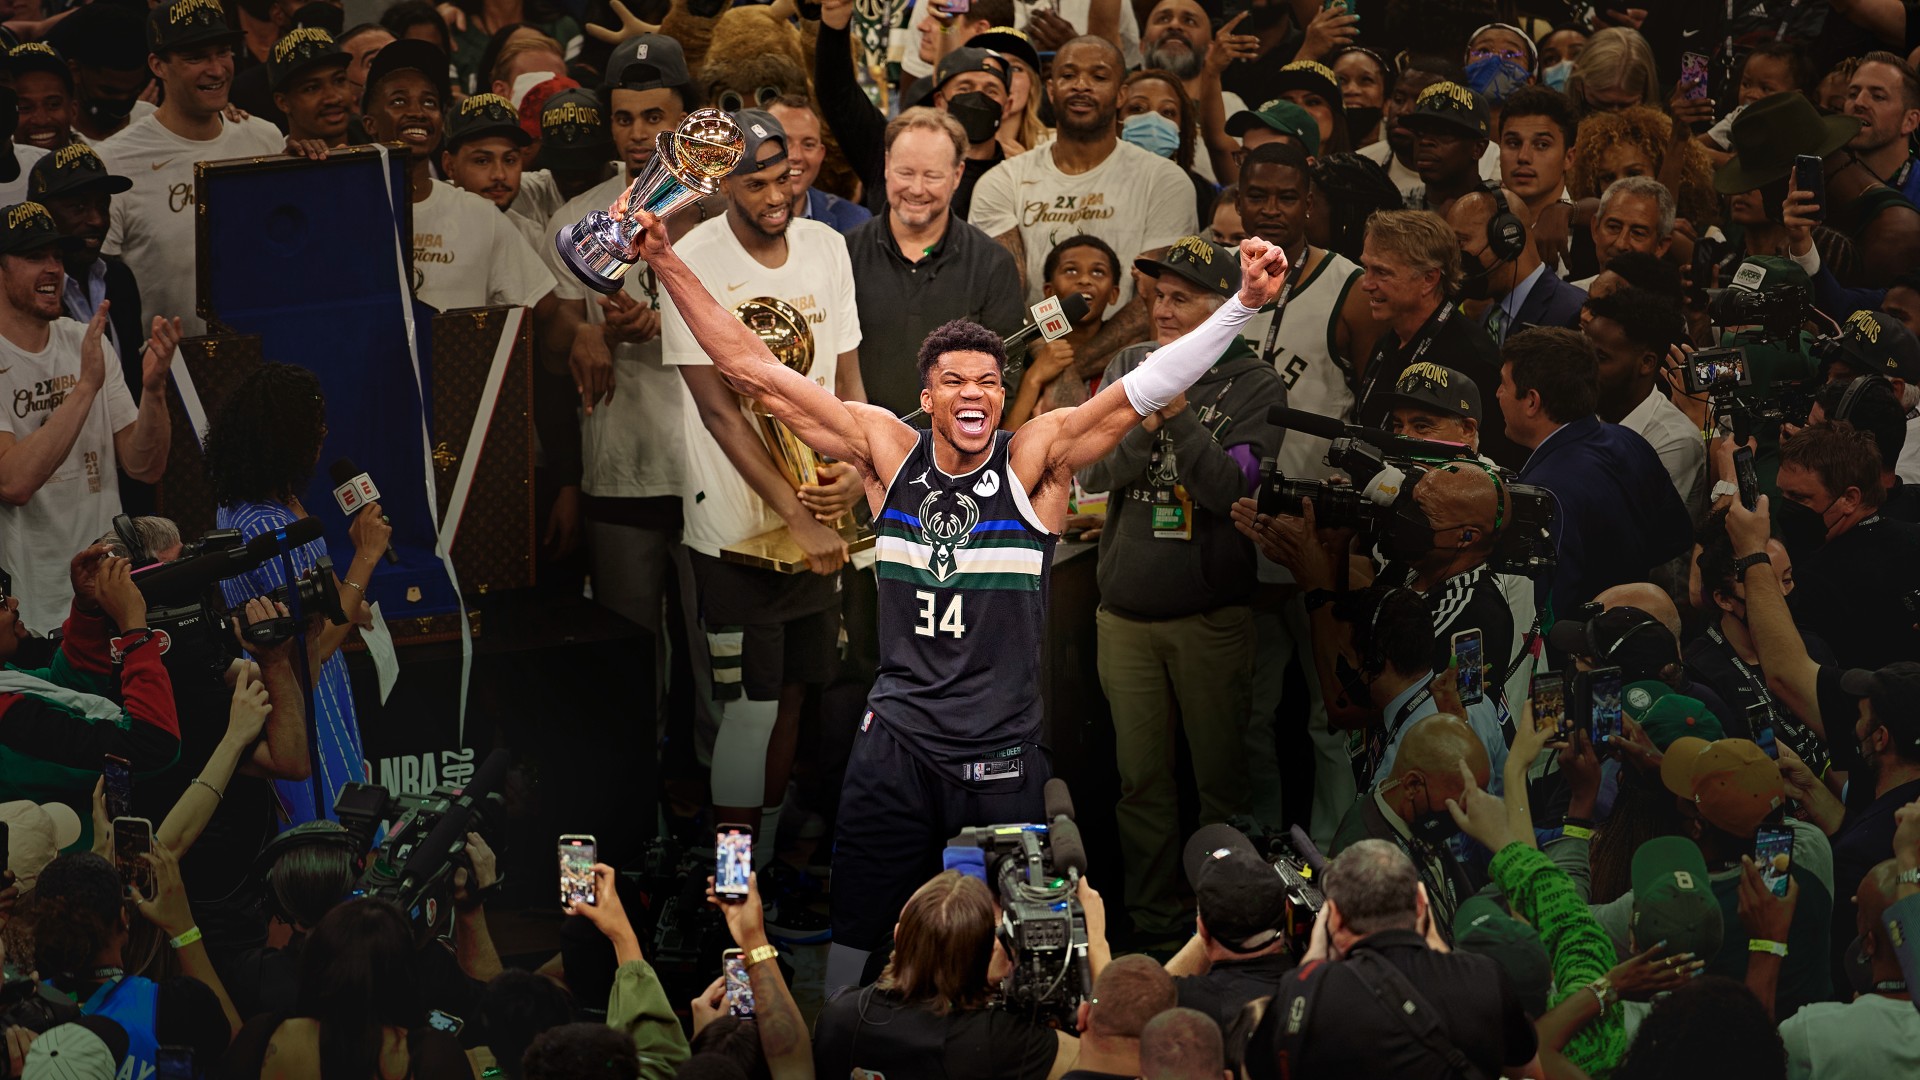 Giannis Antetokounmpo scored 50 points in Game 6 of the NBA Finals to clinch the NBA title.